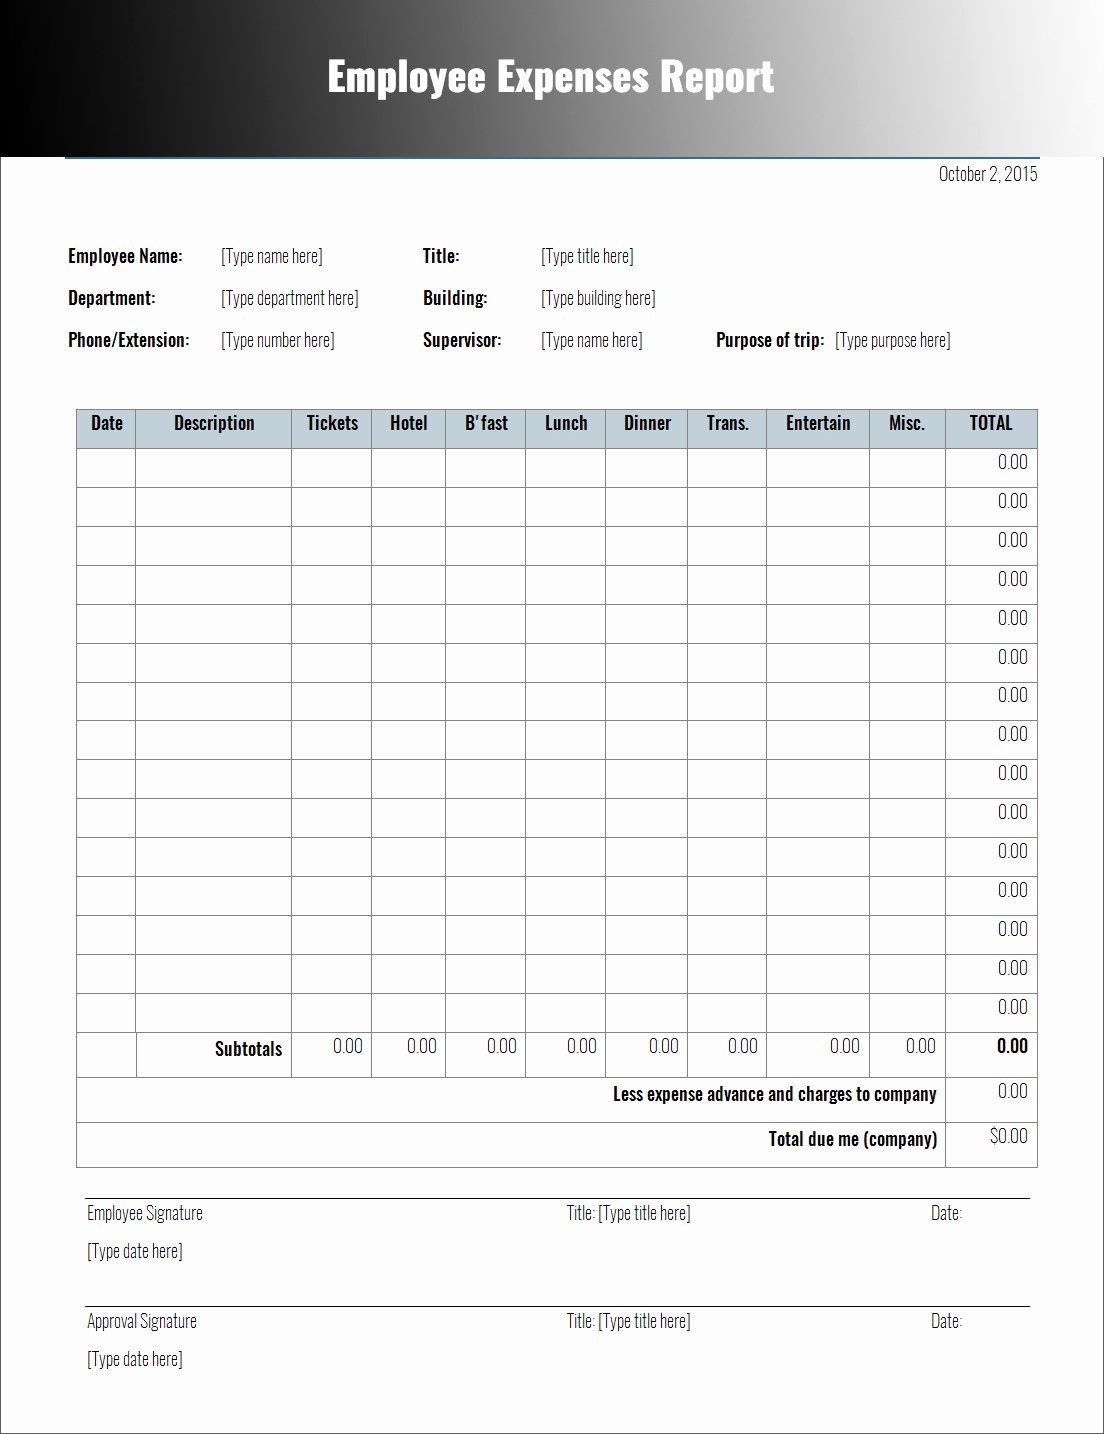 Monthly Expense Report Template Luxury 15 Professional Samples to Create Business Annual Expense